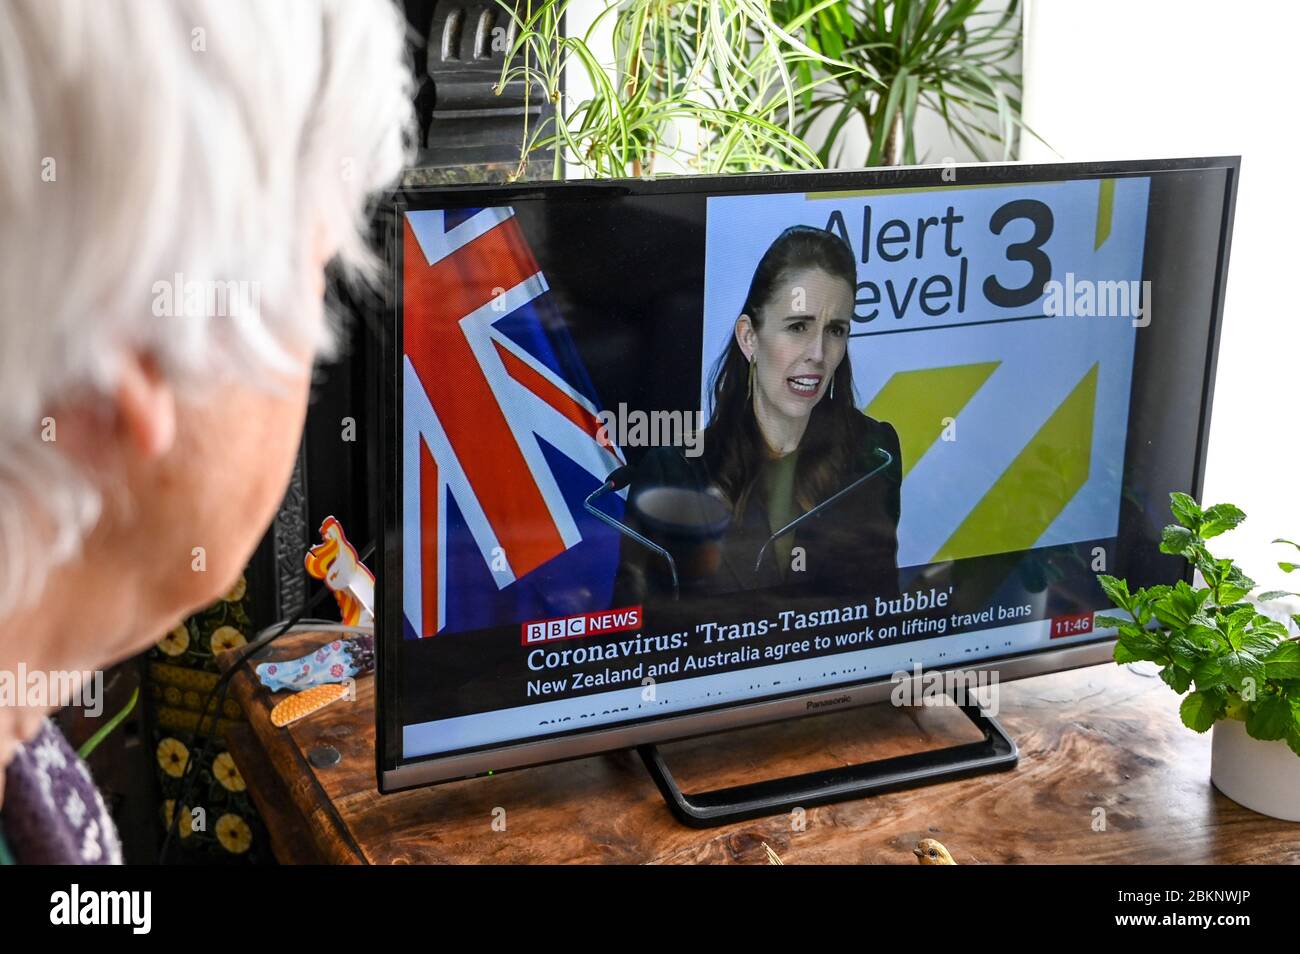 Jacinda Ardern, Prime Minister of New Zealand, announcing a Trans-Tasman travel bubble between NZ and Australia during the coronavirus pandemic. Stock Photo